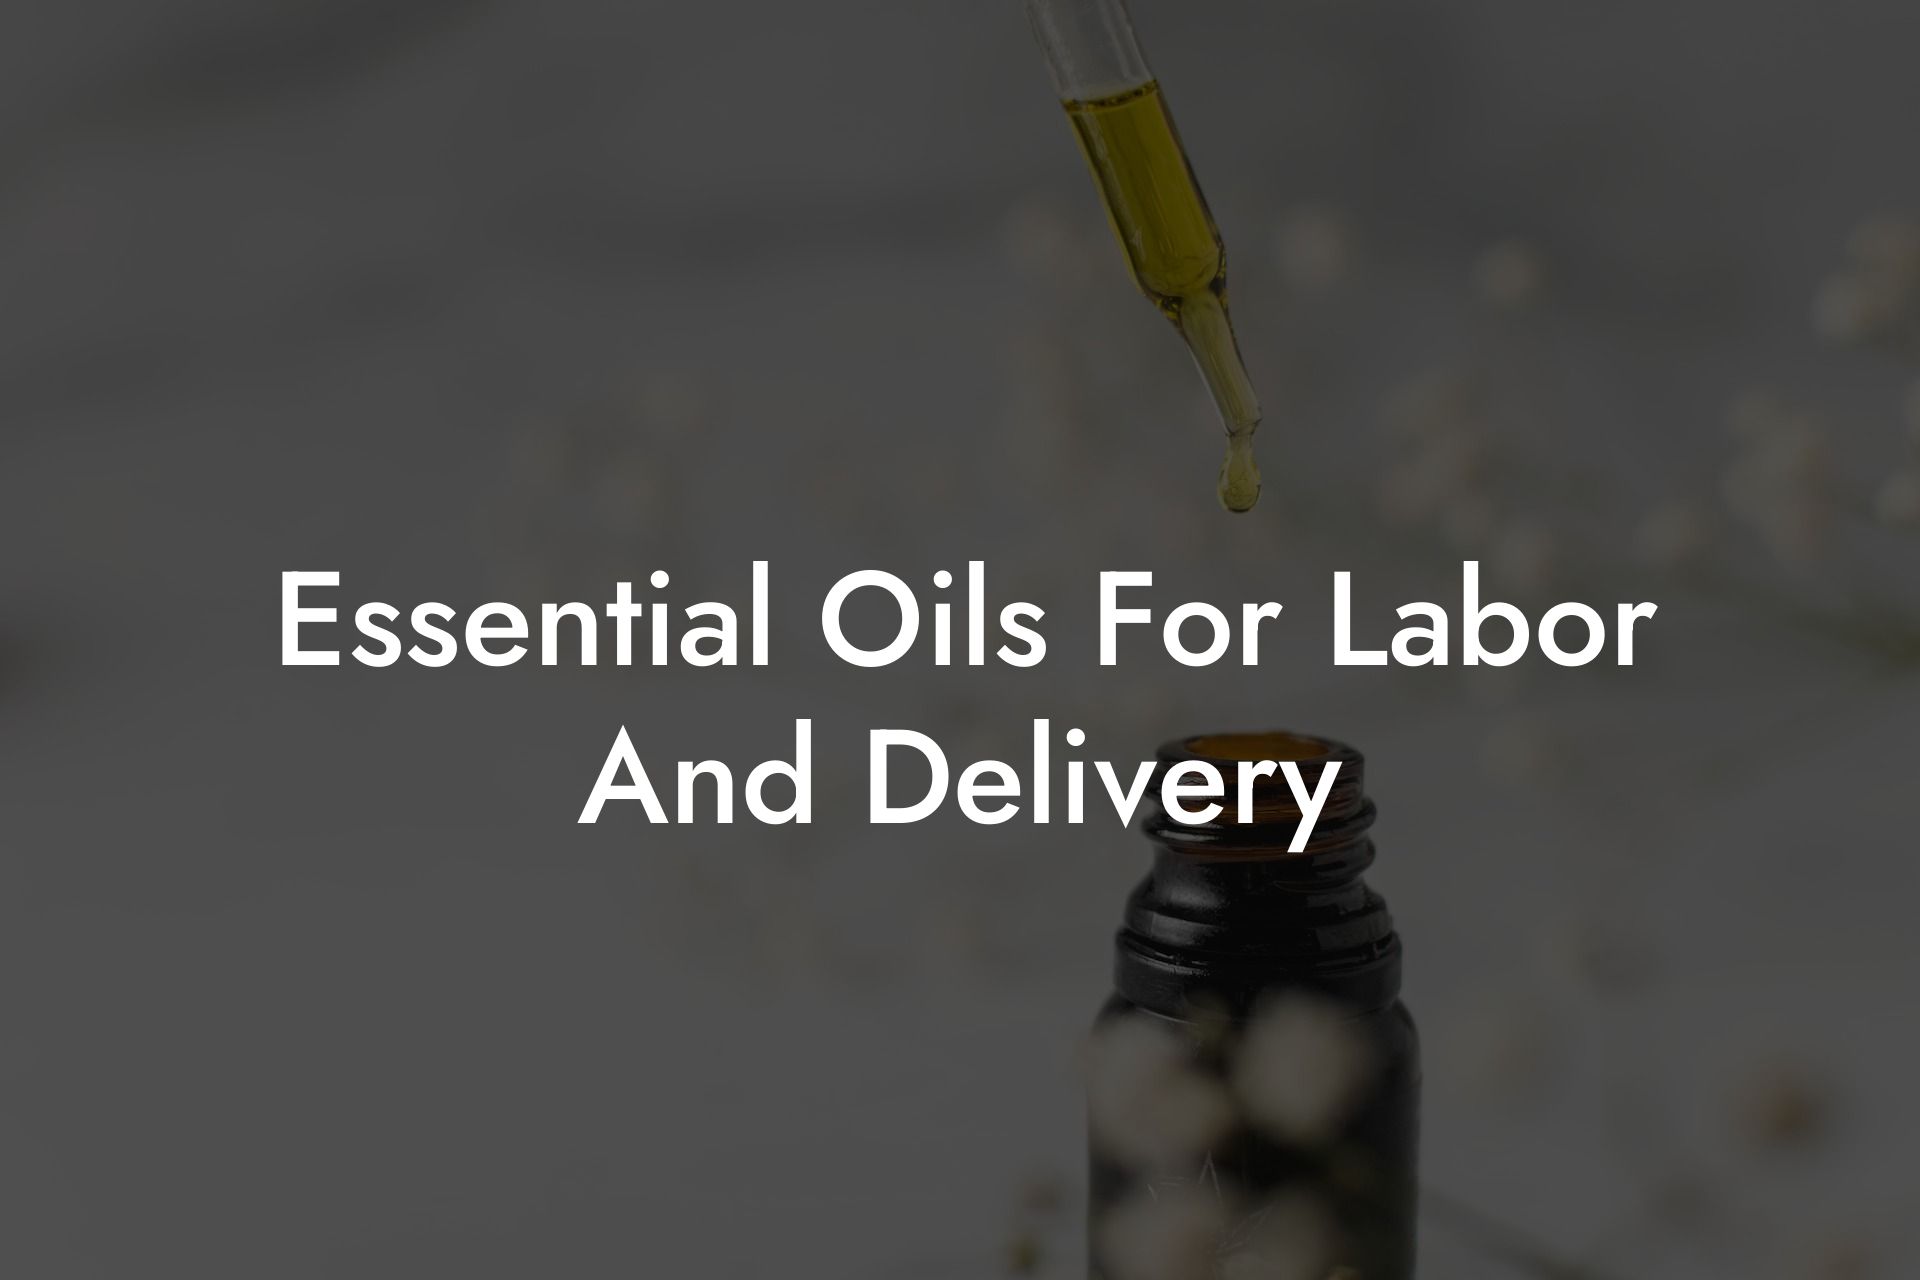 Essential Oils For Labor And Delivery